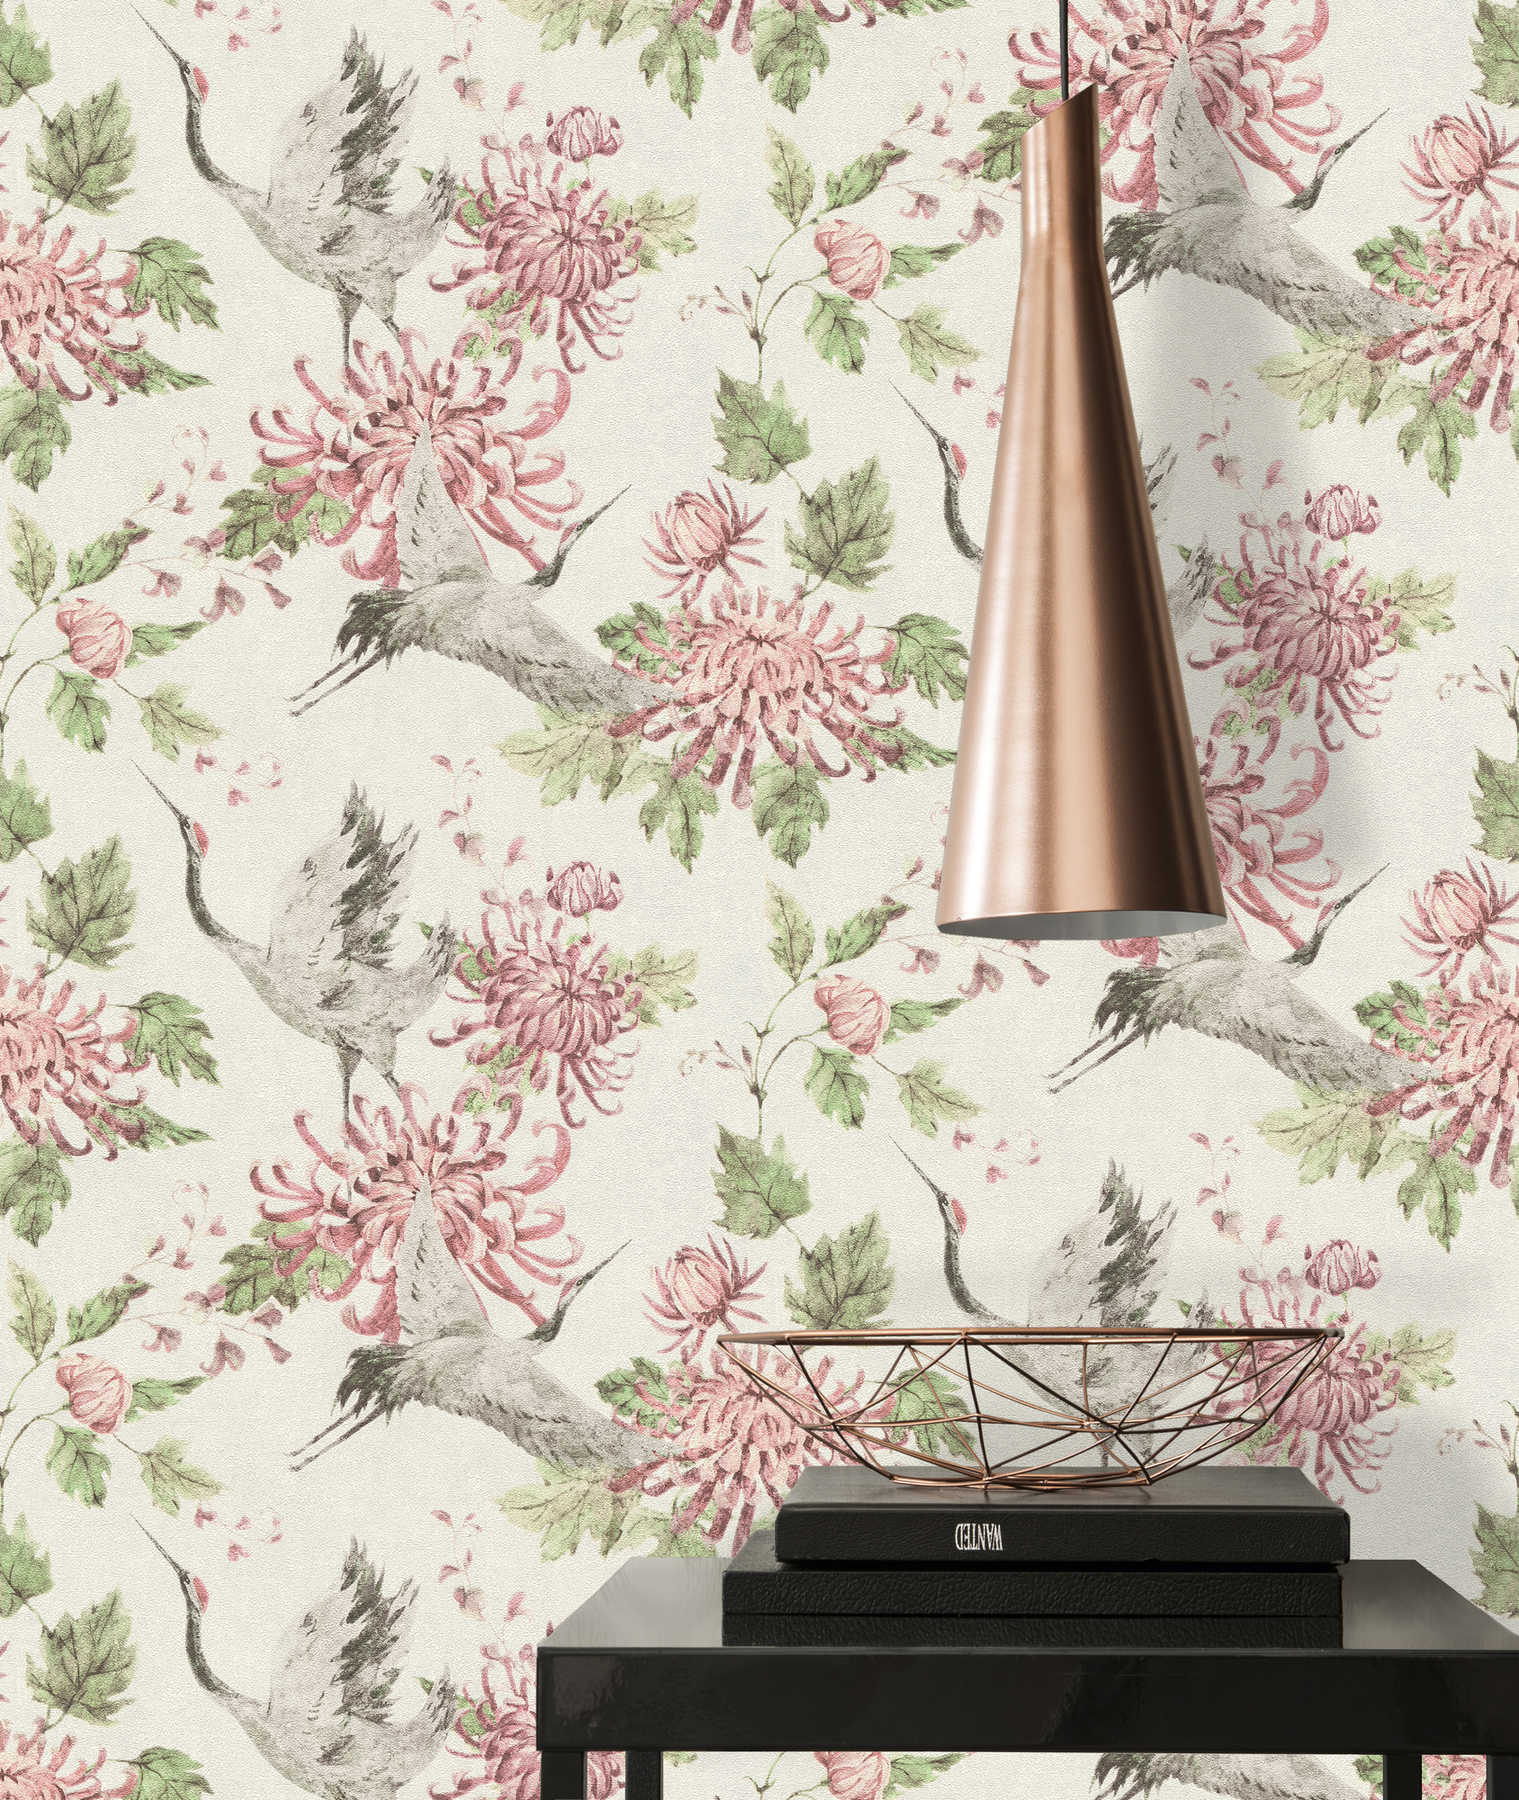             Pattern wallpaper with Asian crane and flower motif - pink, green, white
        